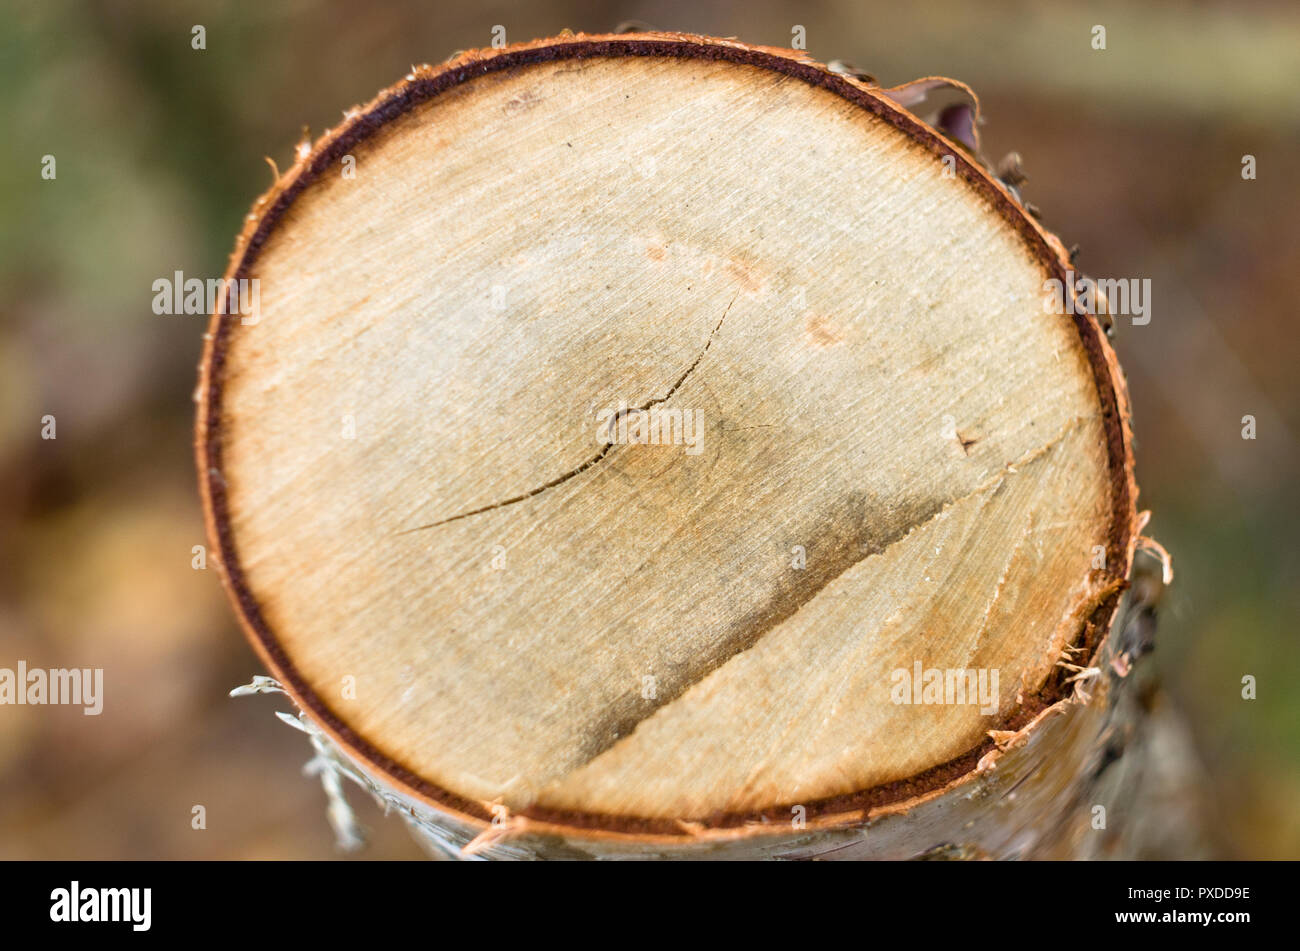 Young birch log cross section, isolated on blurry background. Stock Photo